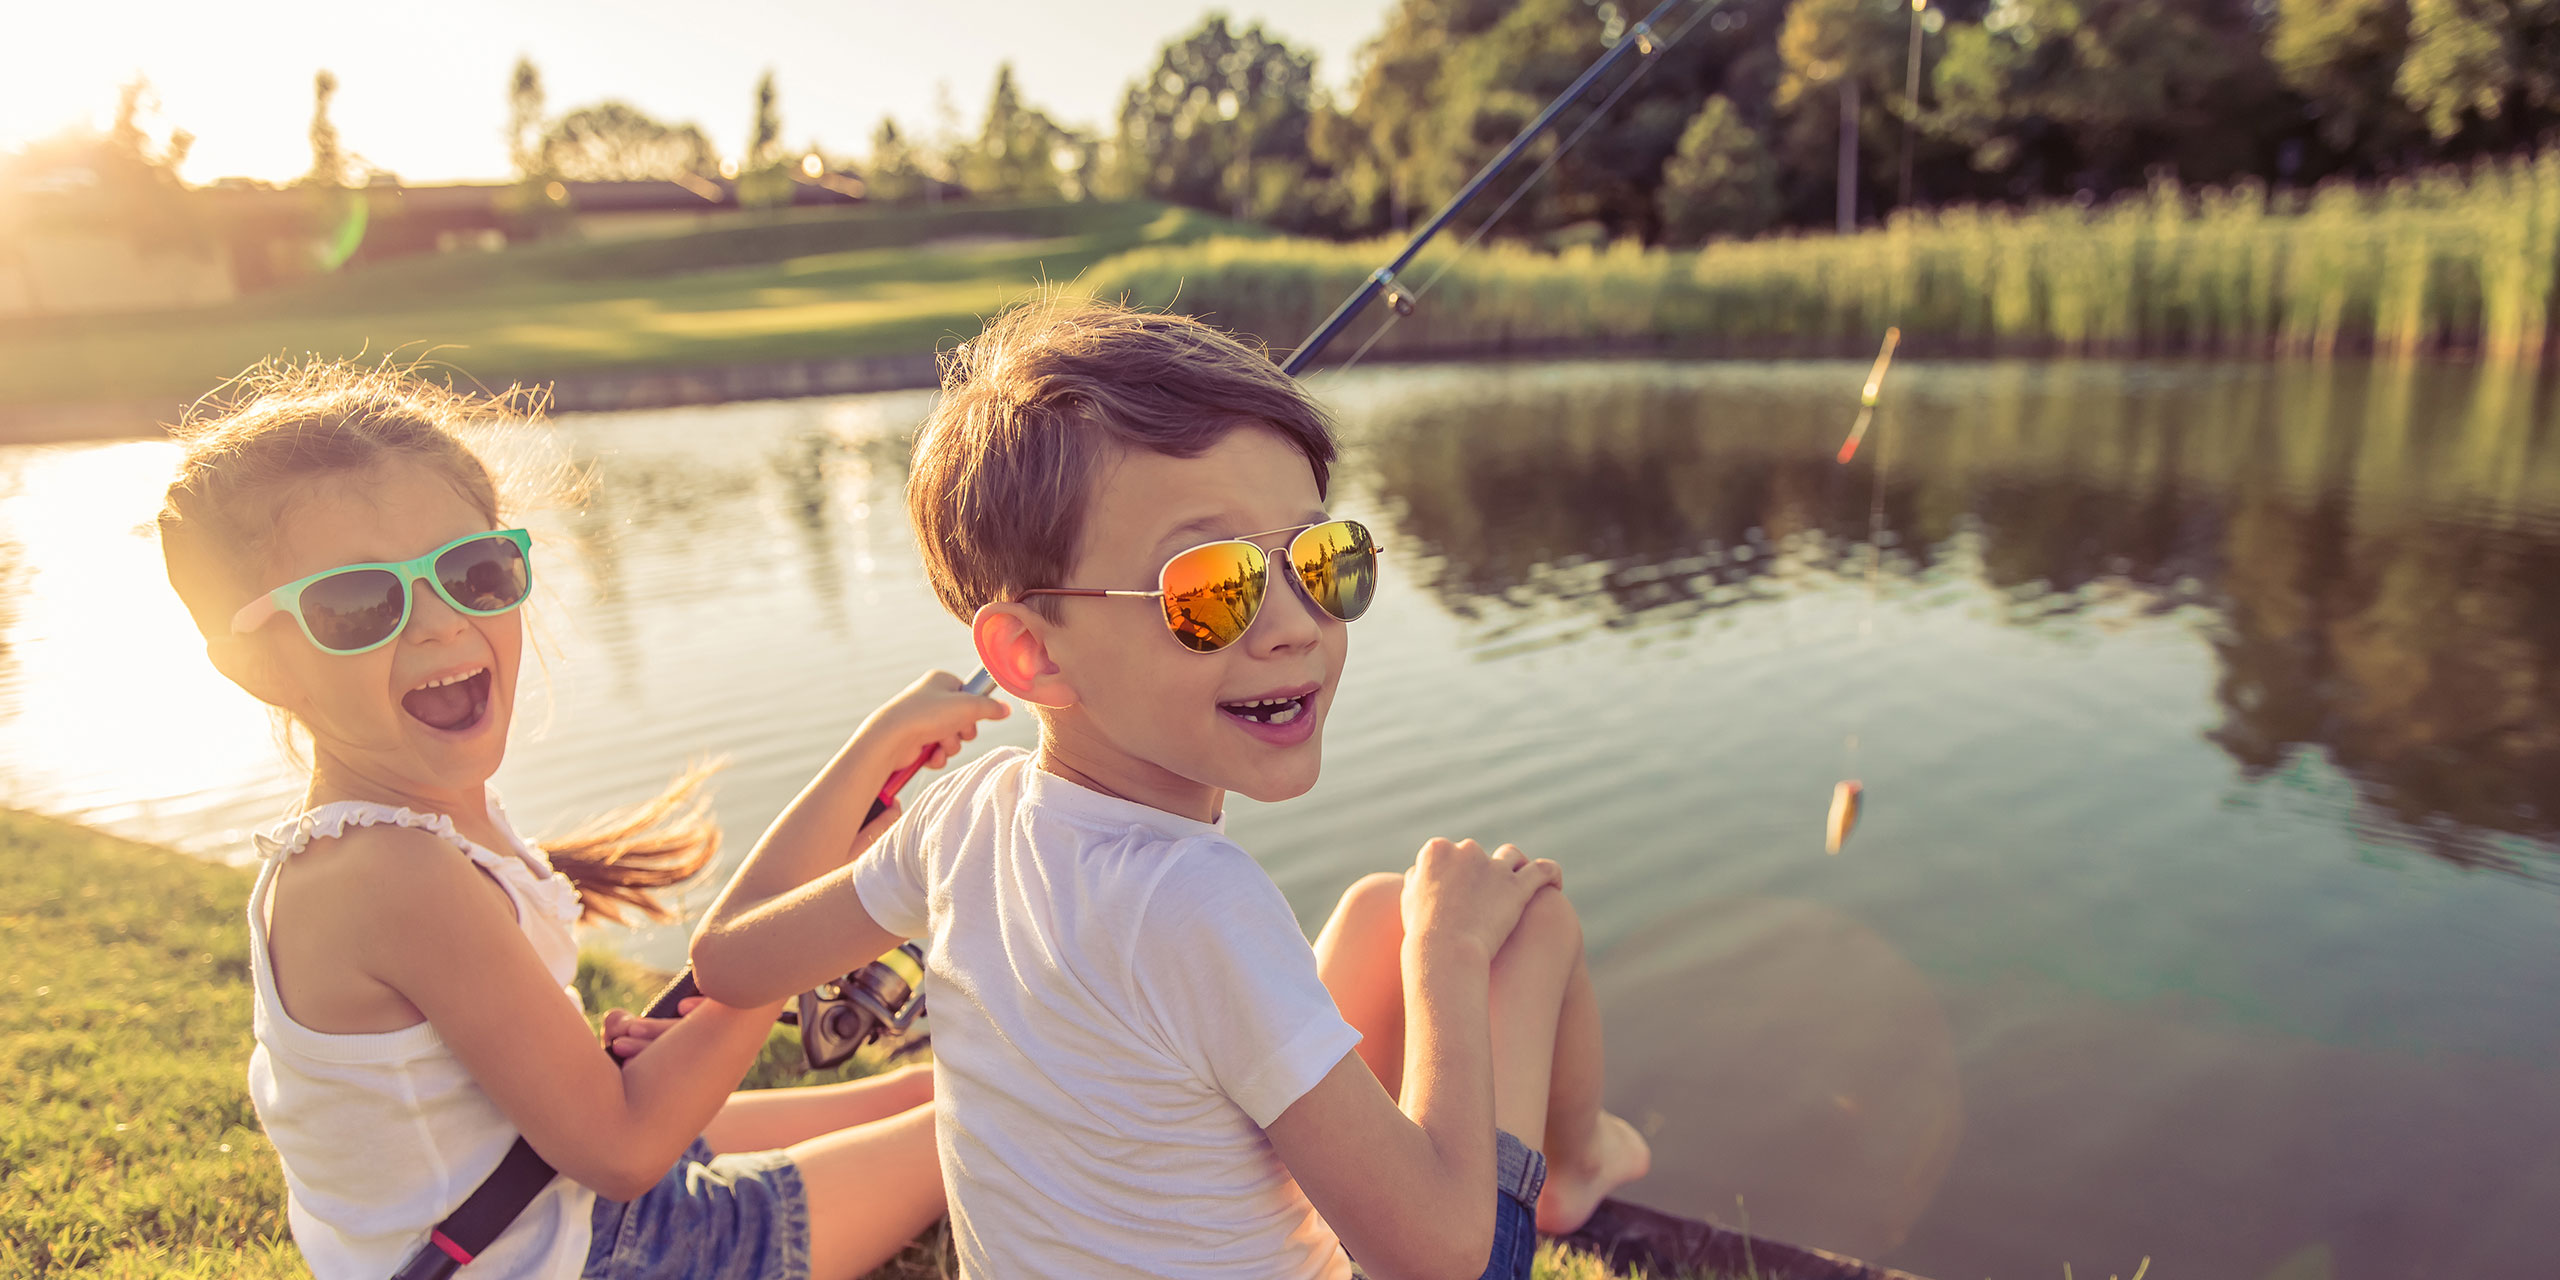 Fishing; Courtesy of George Rudy/Shutterstock.com